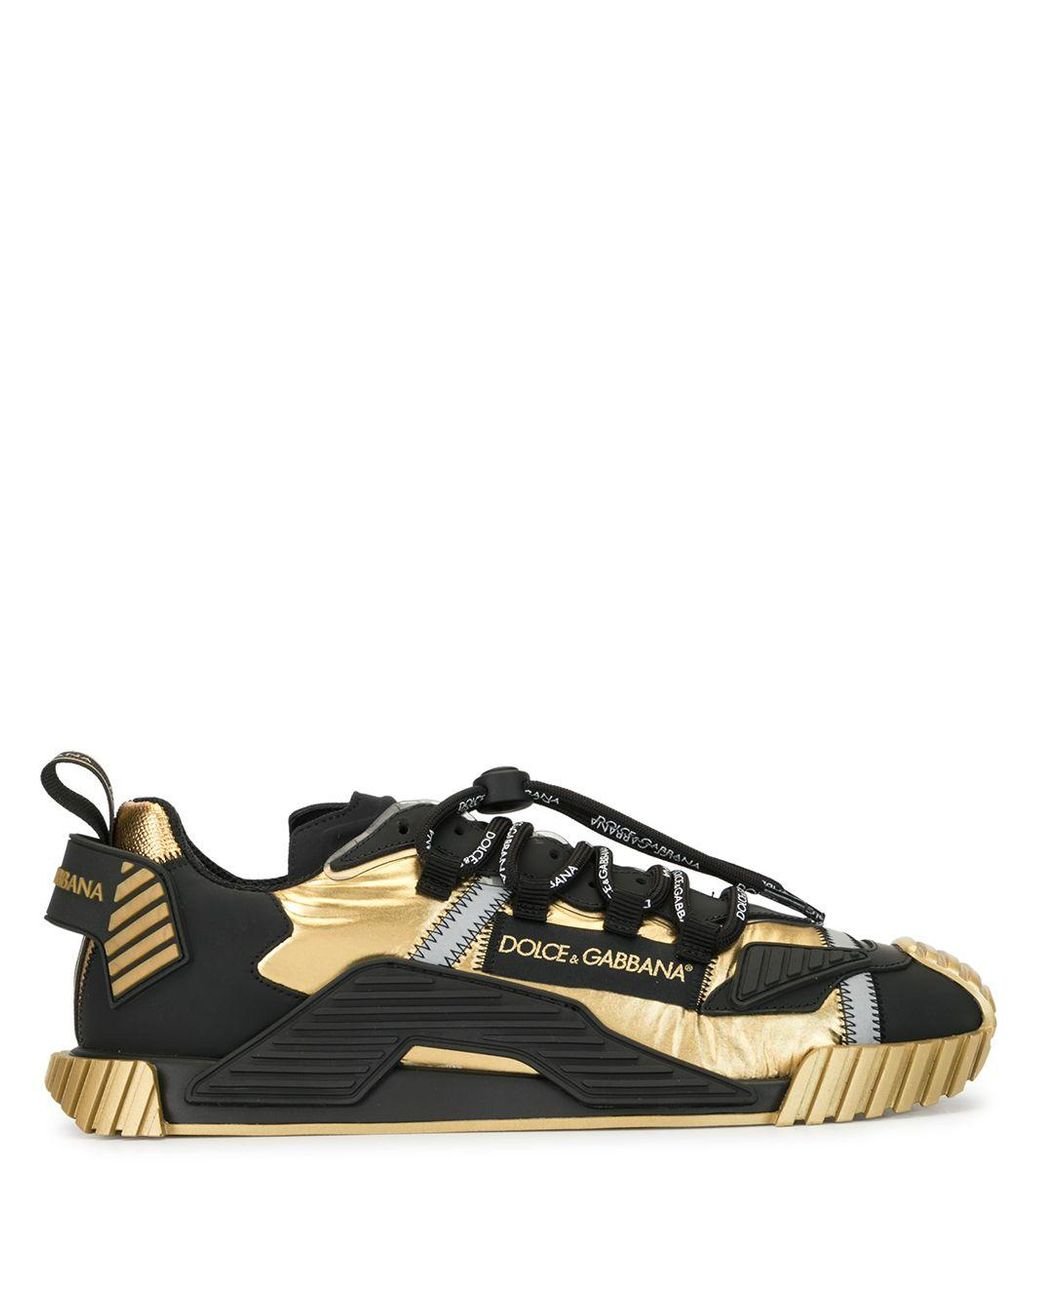 Dolce & Gabbana Ns1 Sneakers In Mixed Materials in Black for Men | Lyst